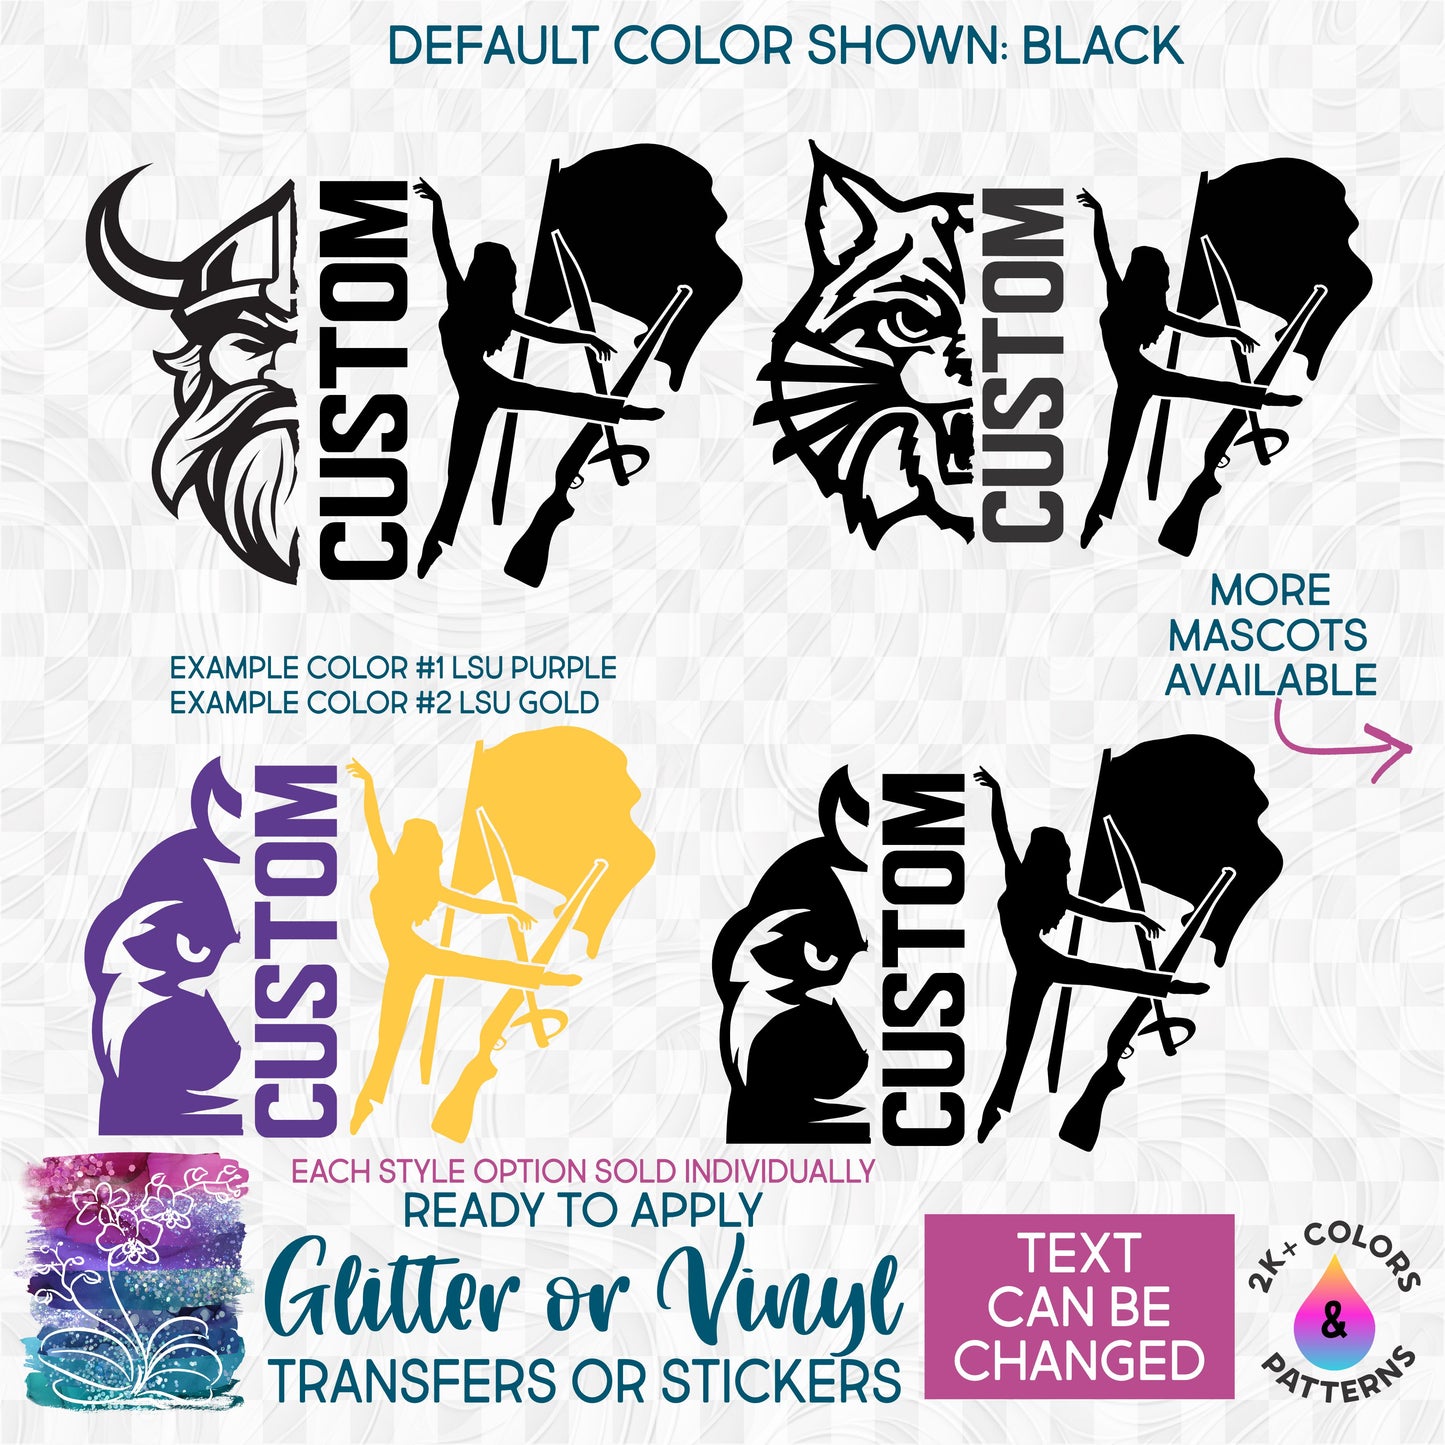 Split Colorguard Color Guard Mascot Team Name Made-to-Order Iron-On Transfer or Sticker